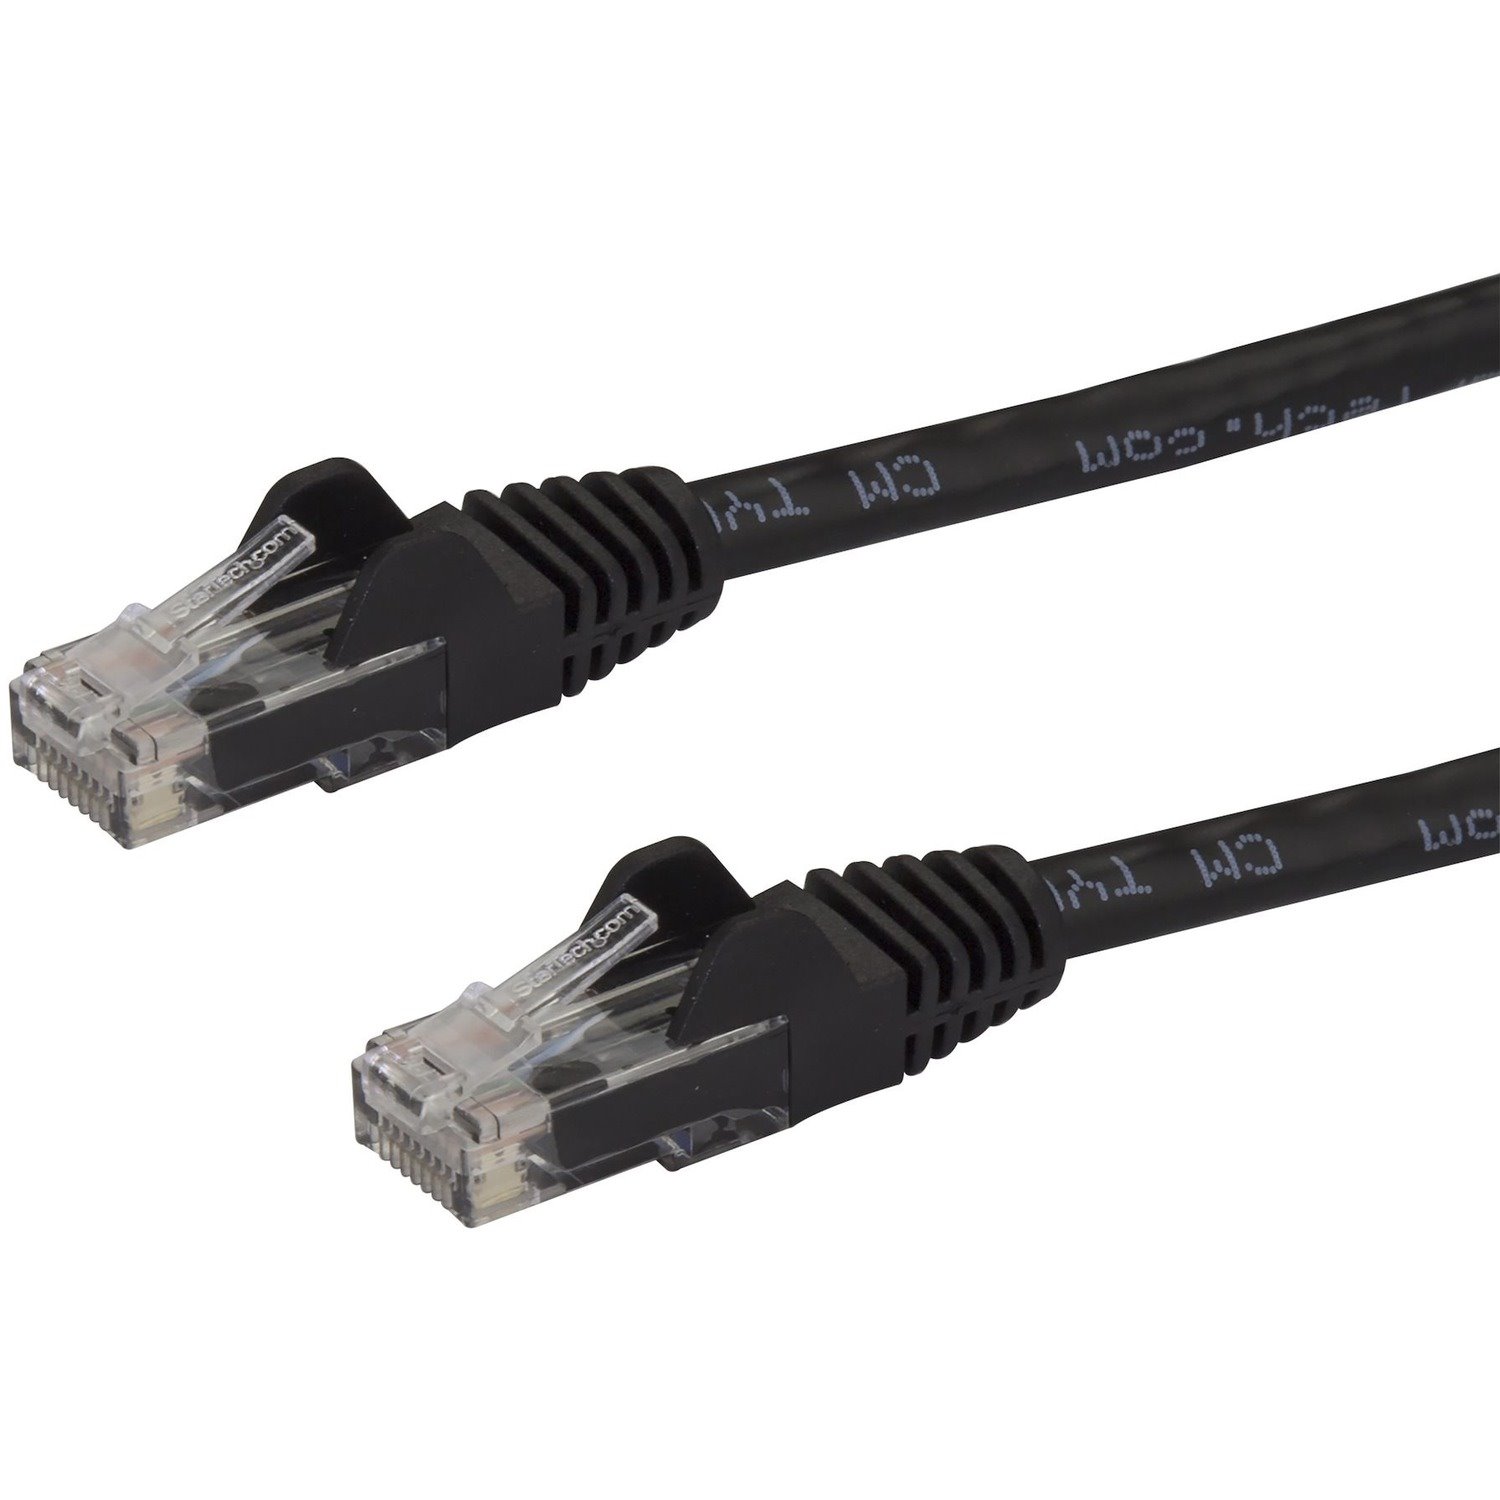 StarTech.com 30ft CAT6 Ethernet Cable - Black Snagless Gigabit - 100W PoE UTP 650MHz Category 6 Patch Cord UL Certified Wiring/TIA